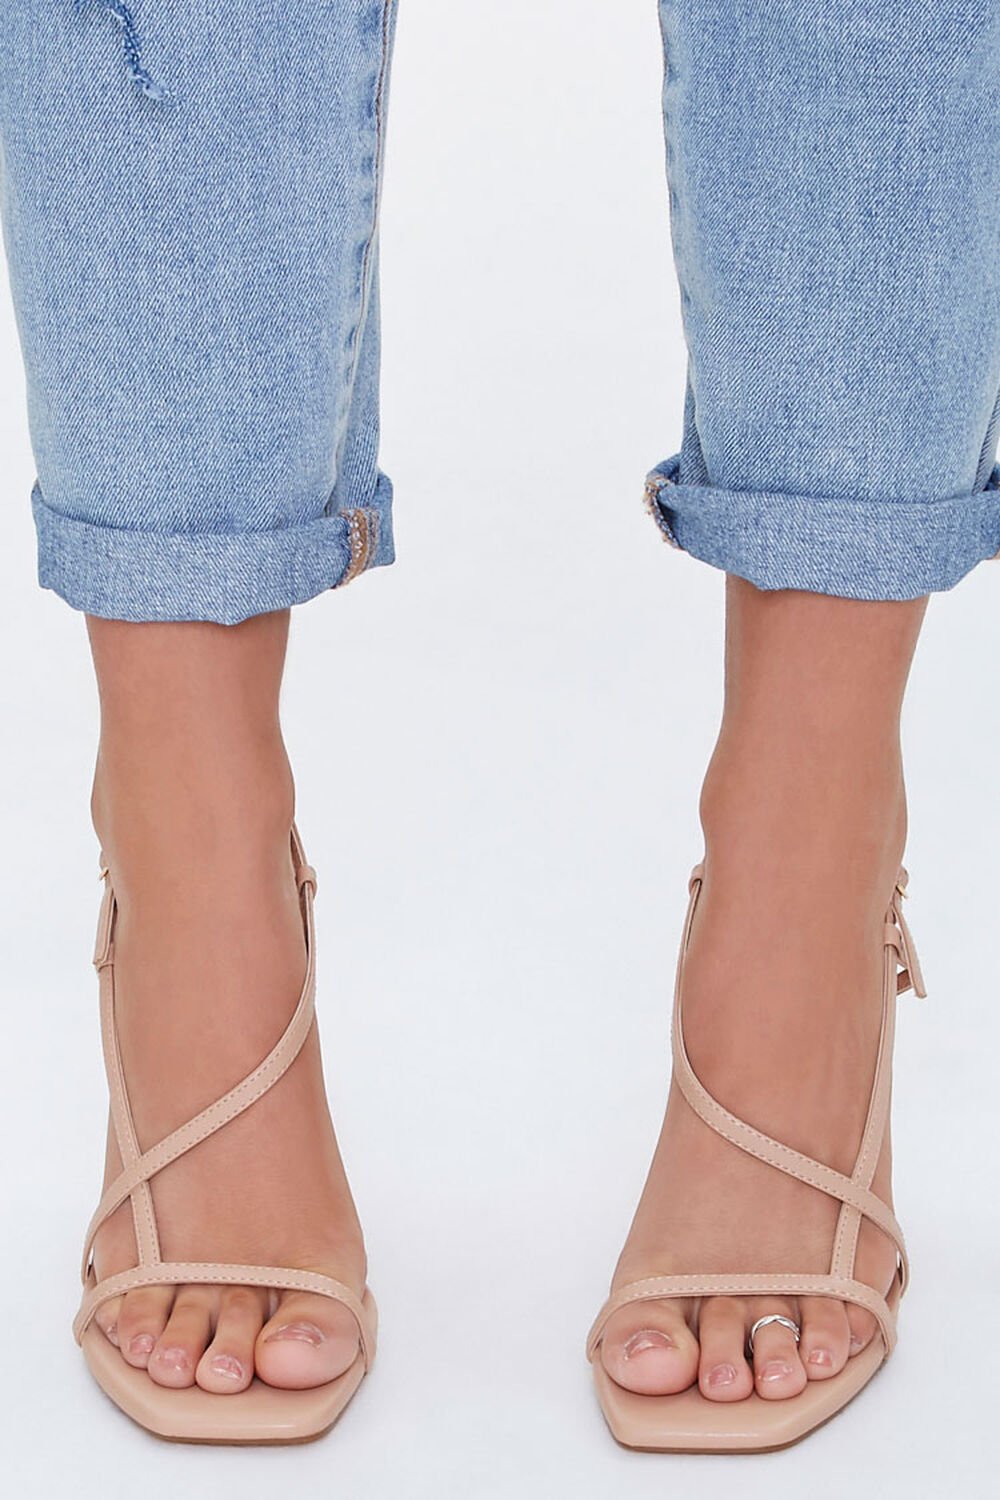 NUDE Strappy Faux Leather Block Heels, image 2